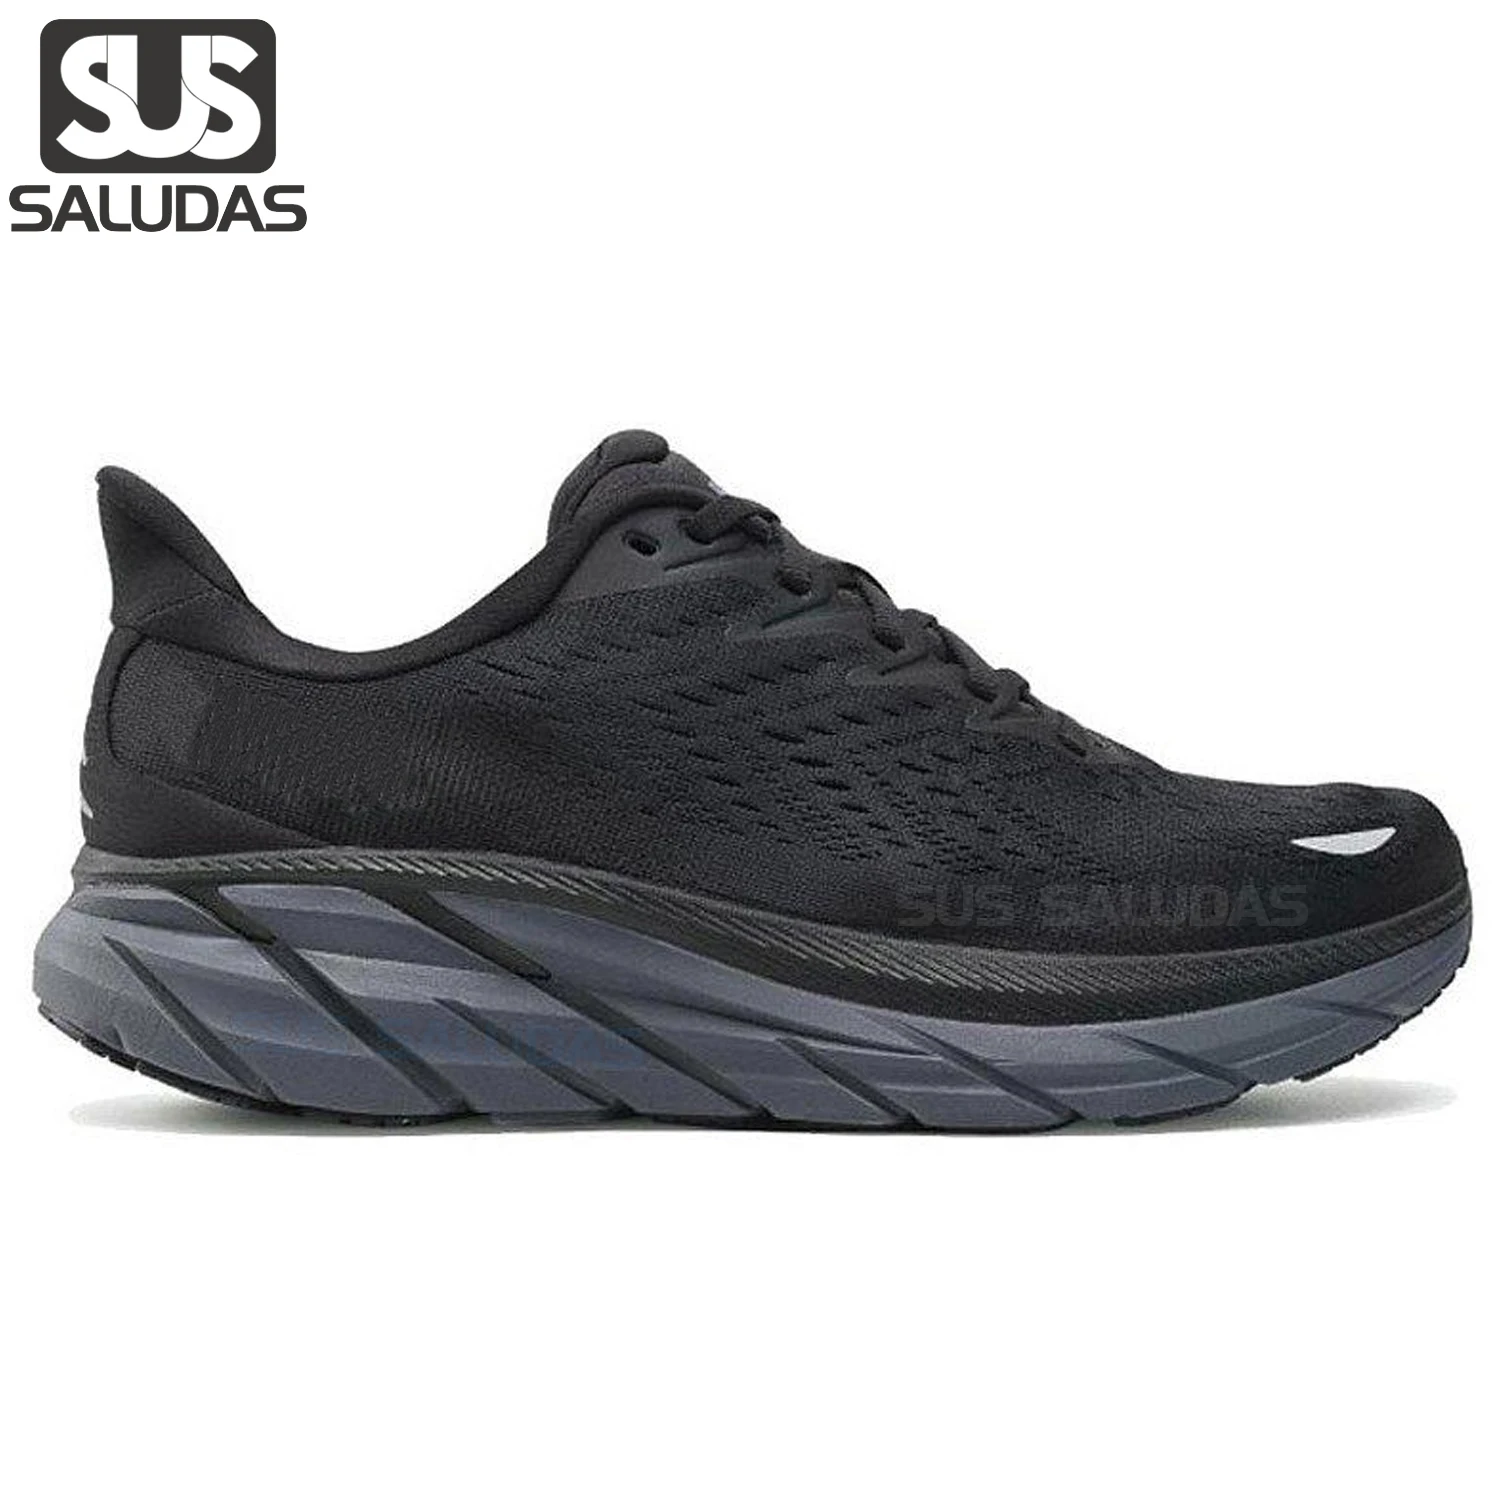 saludas-men-athletic-running-shoes-outdoor-breathable-slip-on-sneakers-fashion-walking-shoes-workout-gym-sports-shoes-for-women